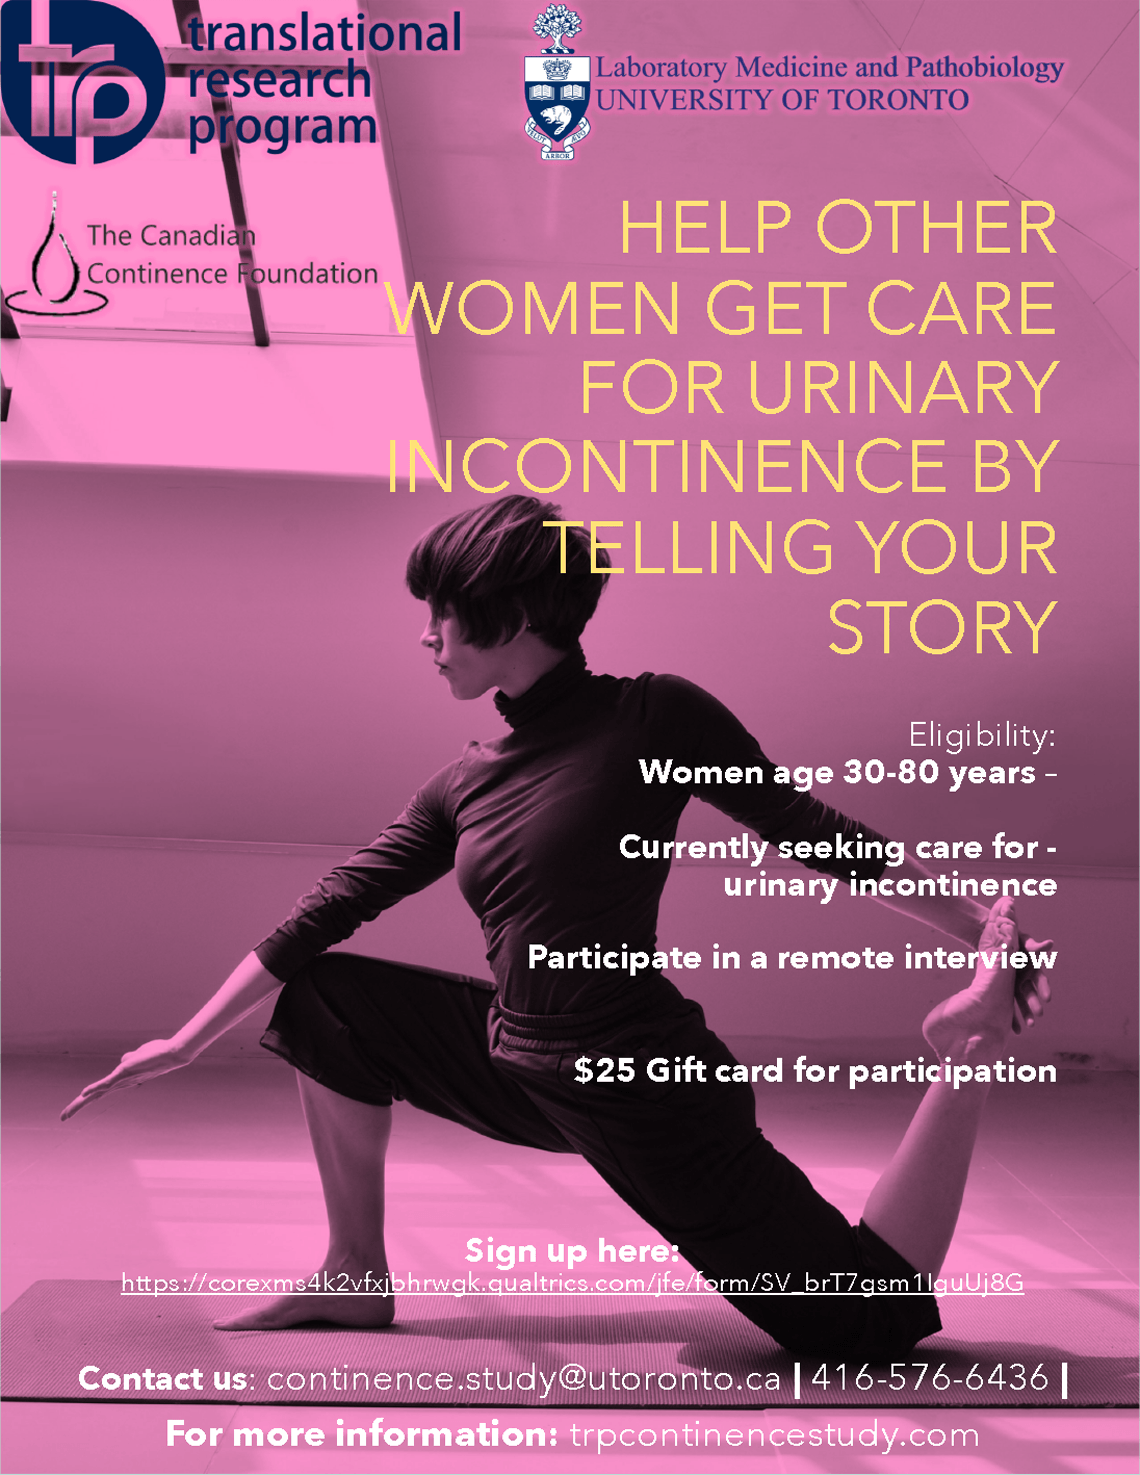 Women age 30 to 60 needed for urinary incontinence study.